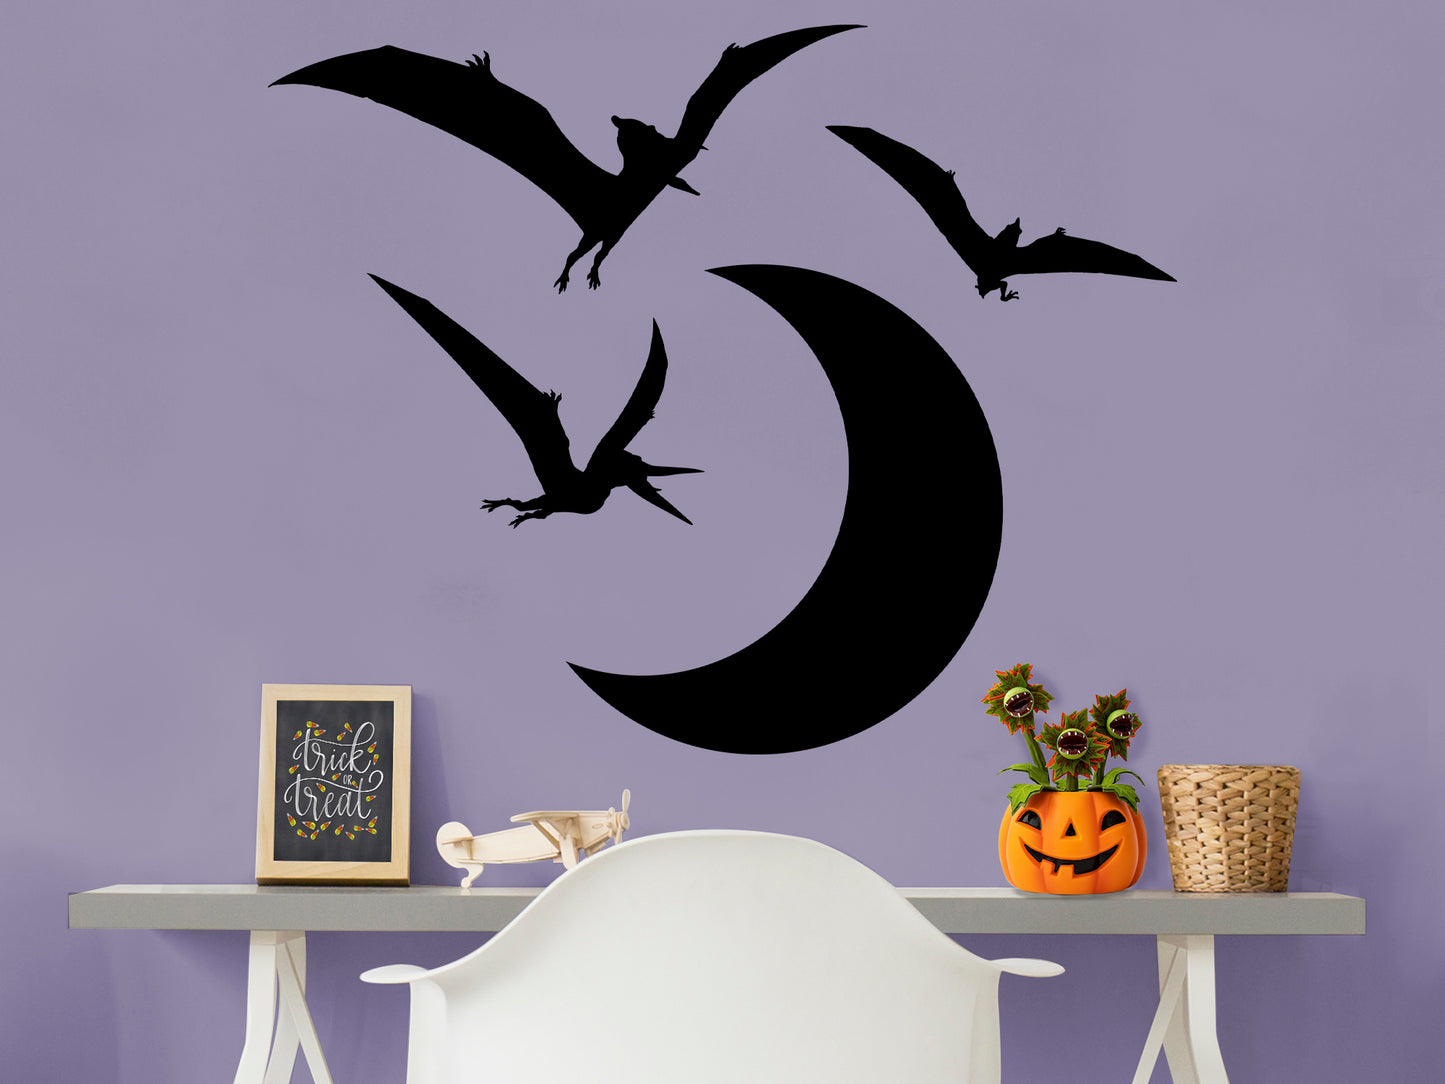 Jurassic World:  Pterodactyl Moon Premask        - Officially Licensed NBC Universal Removable Wall   Adhesive Decal